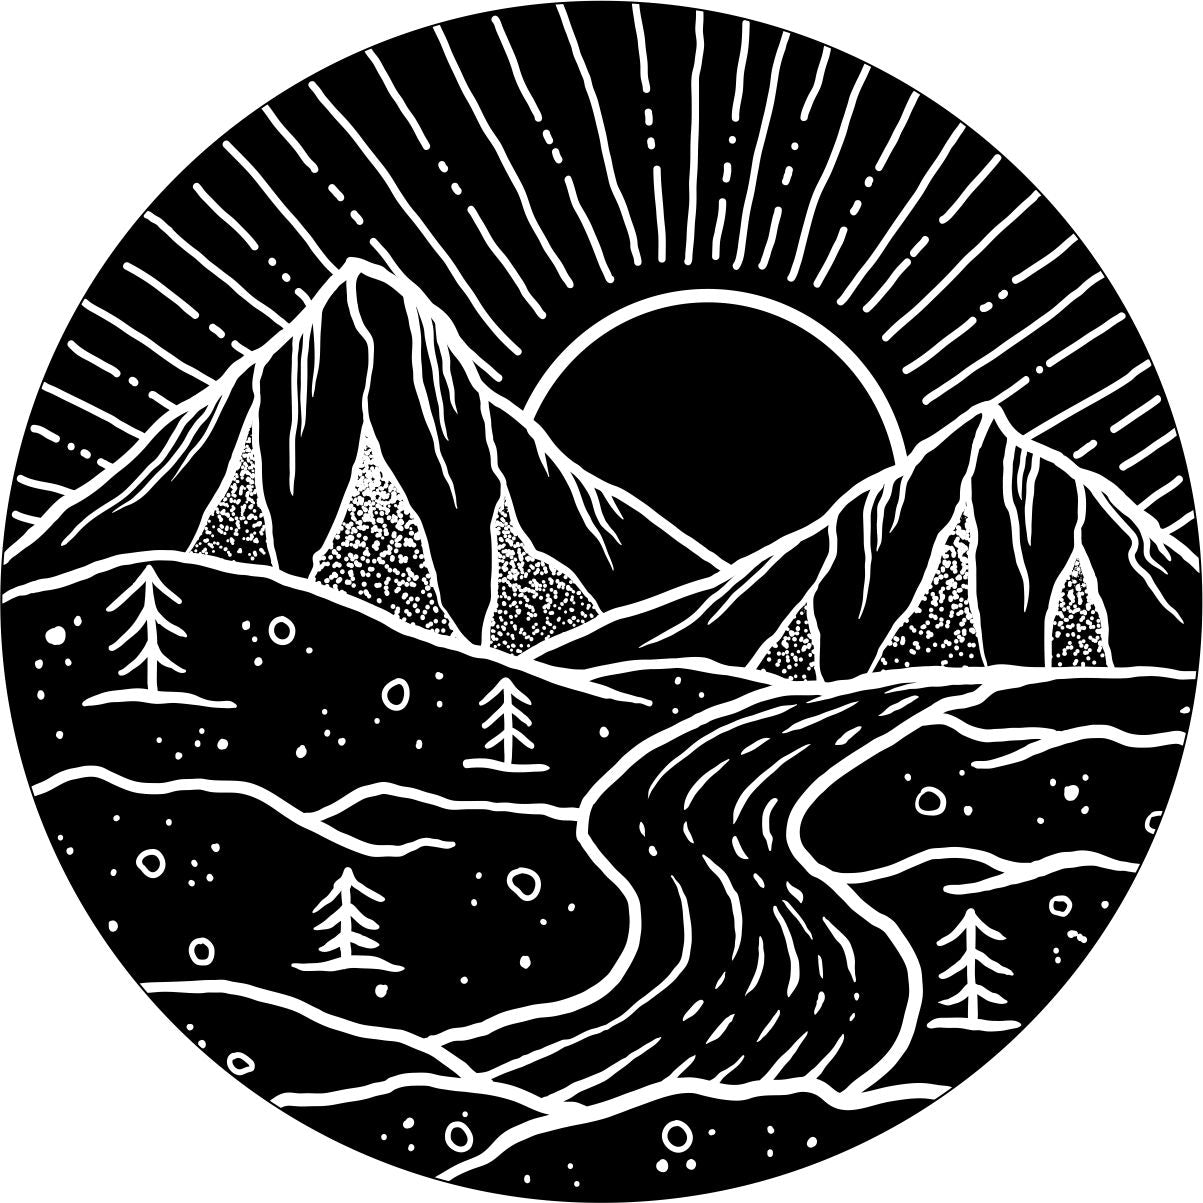 Spare tire cover design of mountains, flowing river, forest, and the sun setting covering the entire sky. Design covers seam to seam.